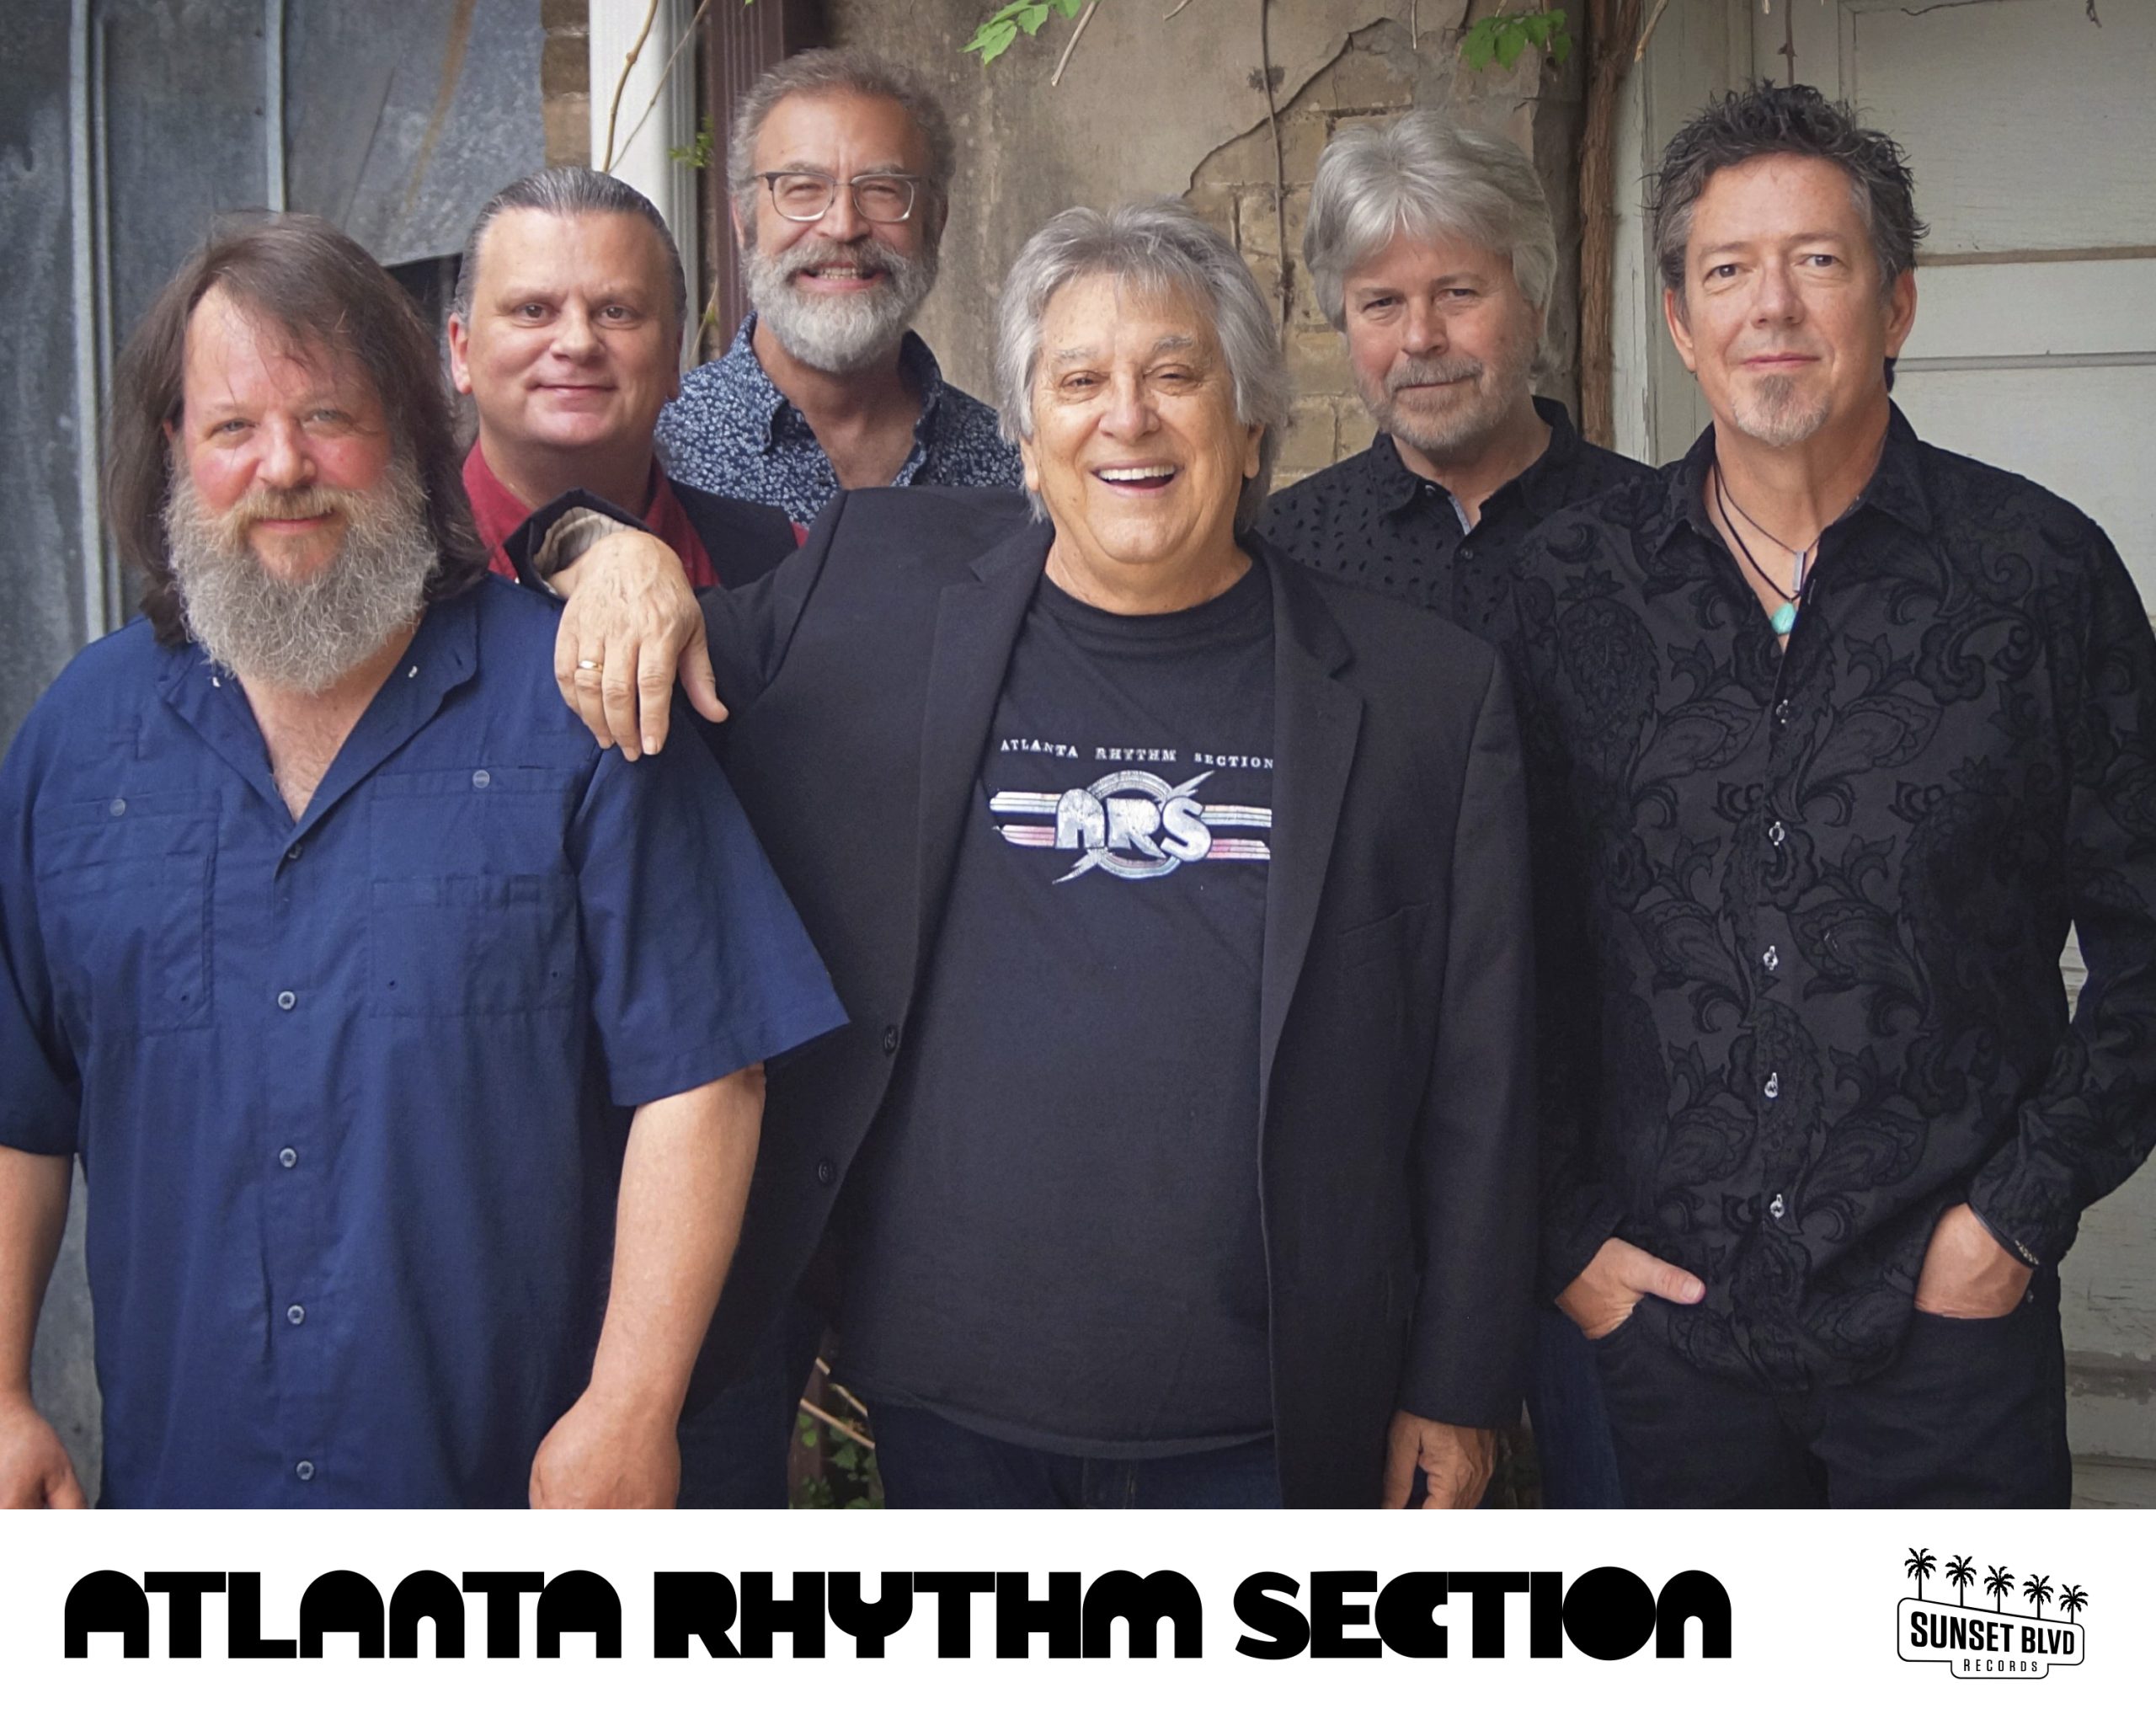 Win Tickets to Atlanta Rhythm Section at Rochester Opera House